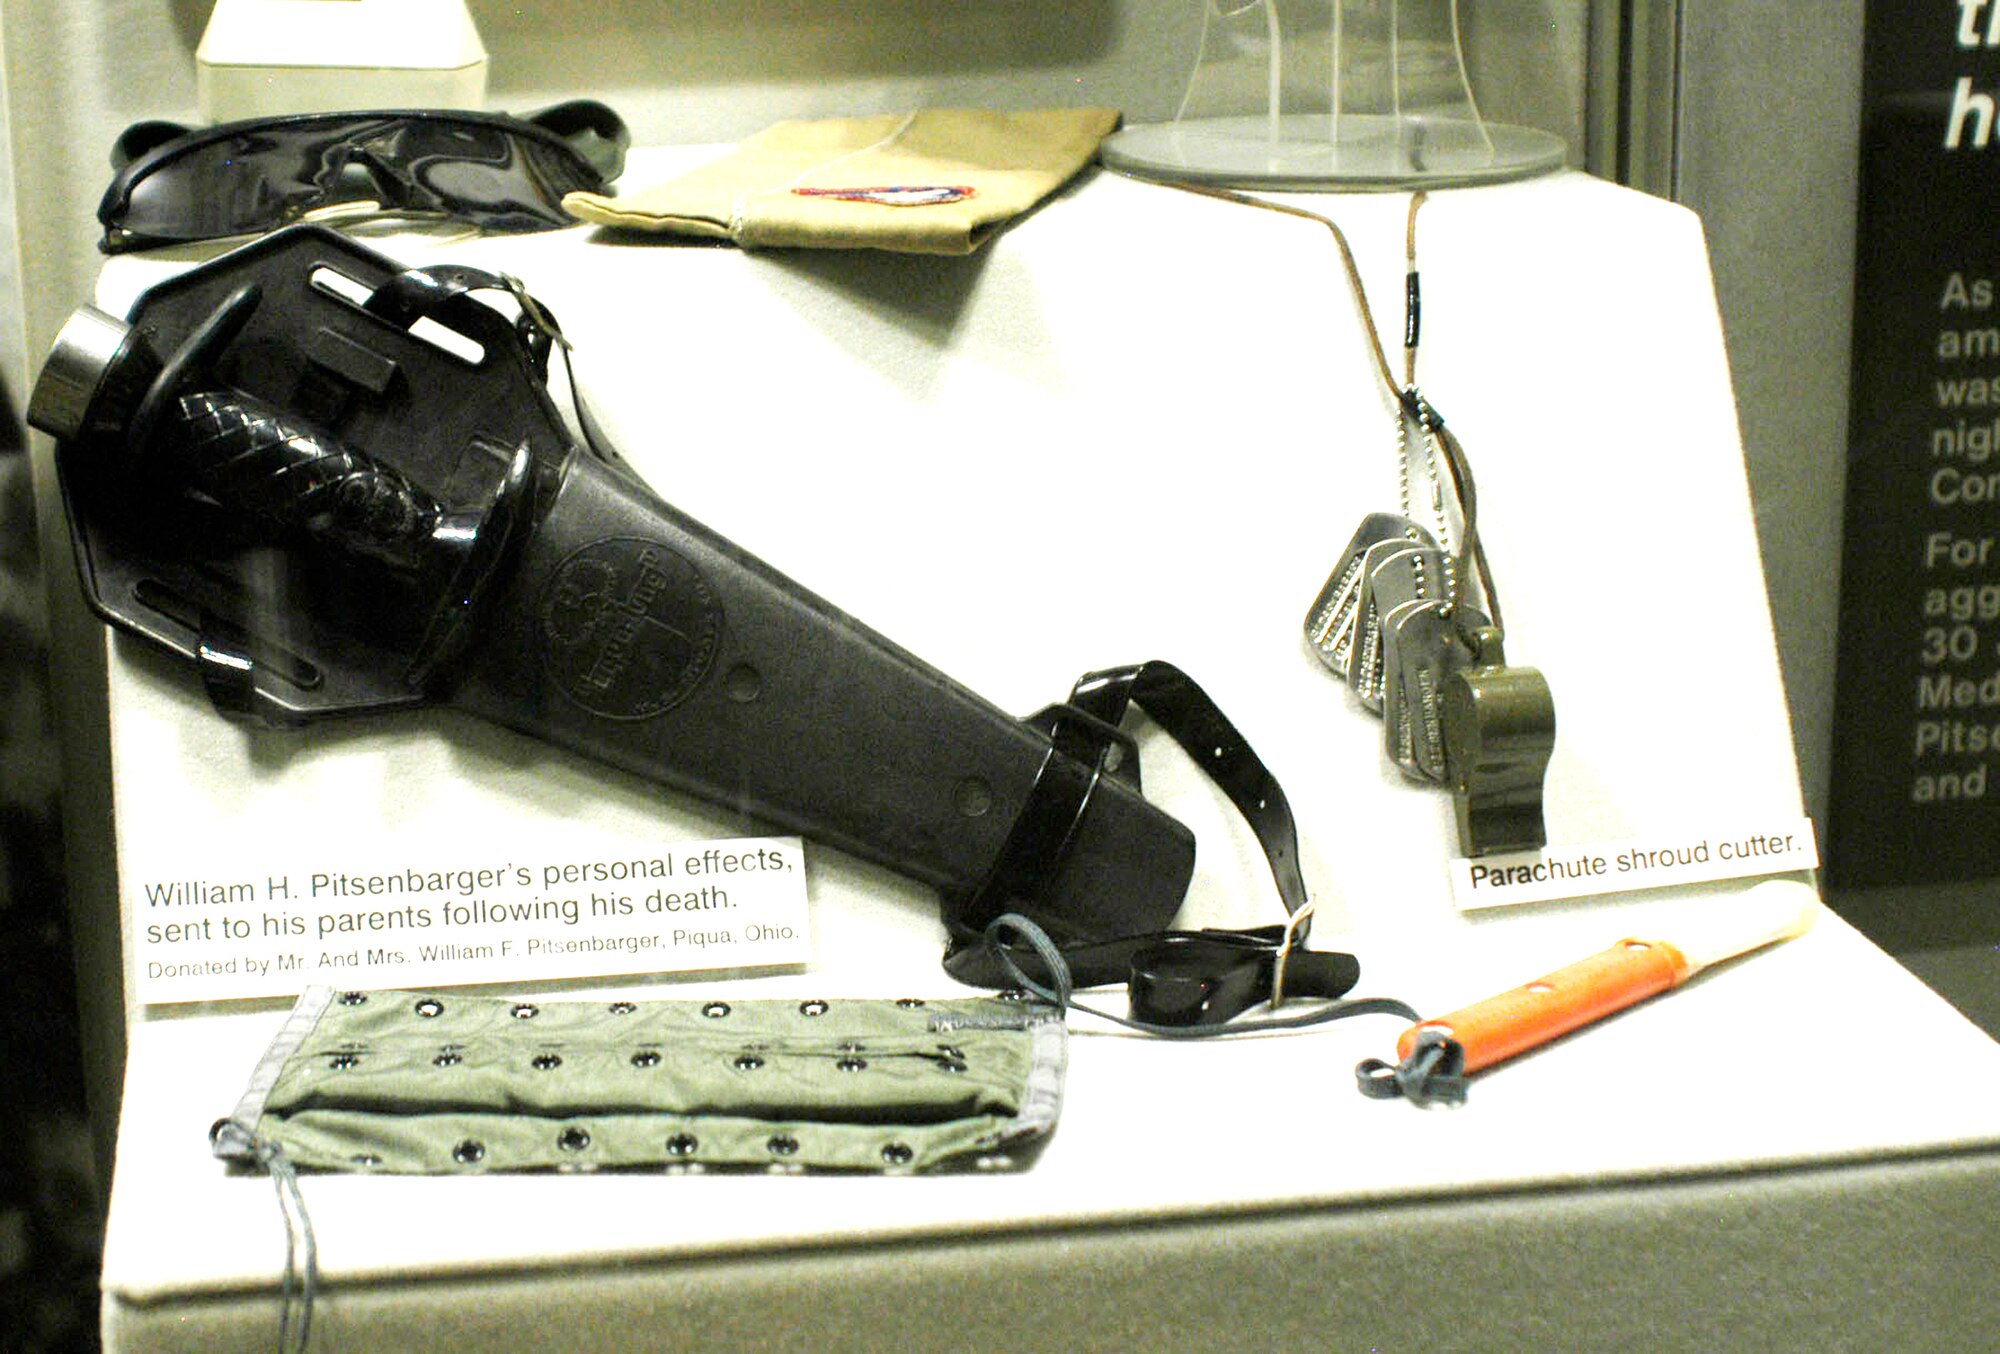 William H. Pitsenbarger's personal effects sent to his parents following his death are on display at the National Museum of the U.S. Air Force in Dayton, Ohio. These items are on display in the Modern Flight Gallery at the museum. (U.S. Air Force photo)